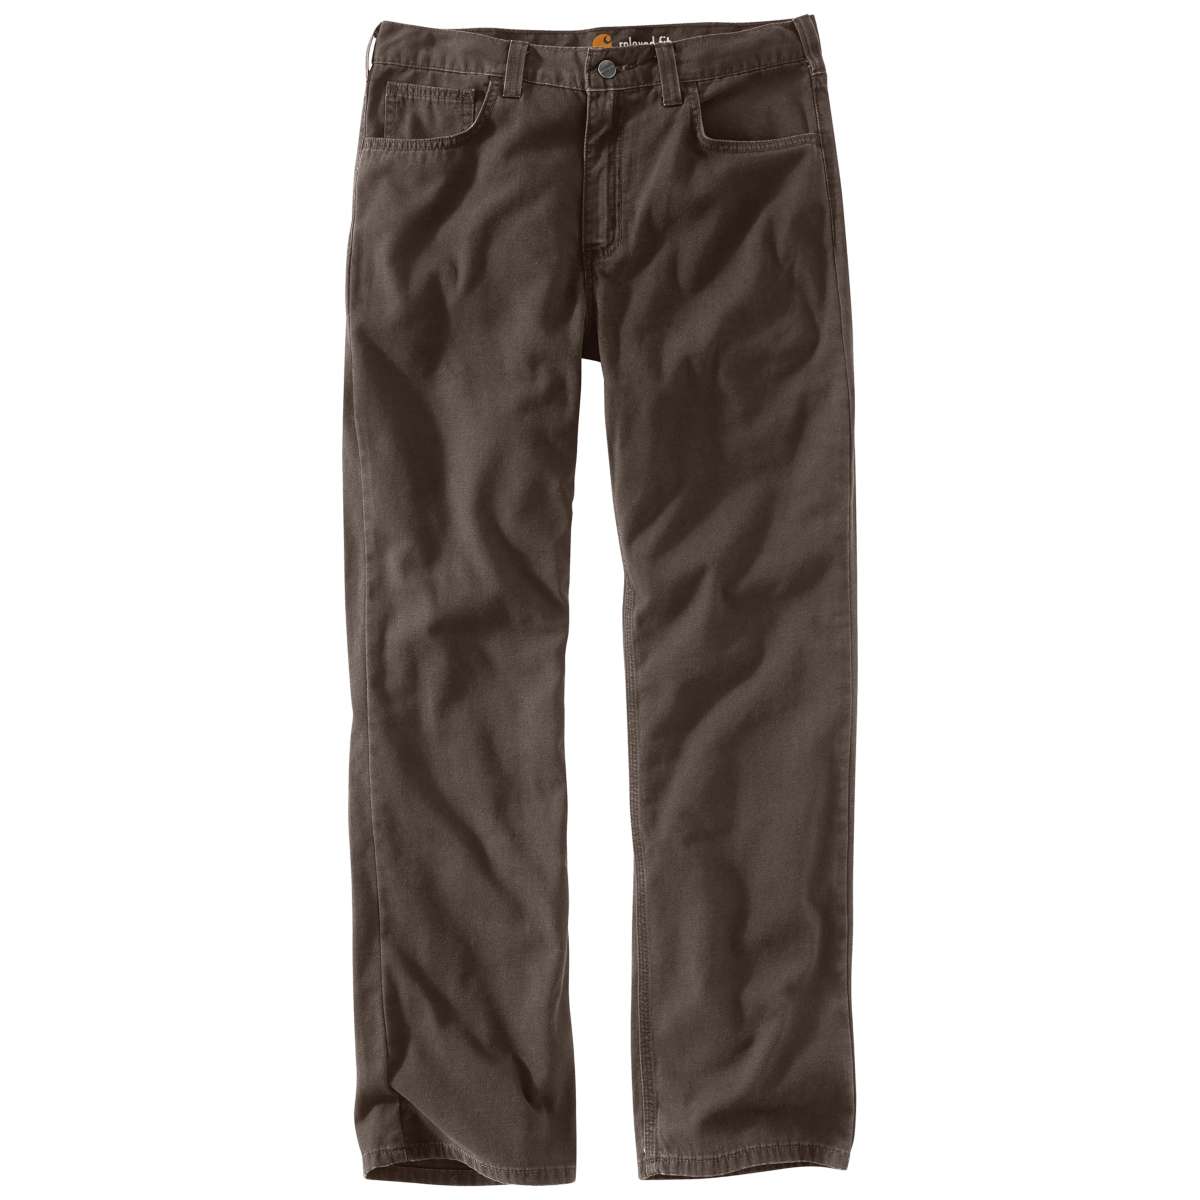 102517 - Carhartt Men's Rugged Flex Relaxed Fit Canvas 5 Pocket Work Pant